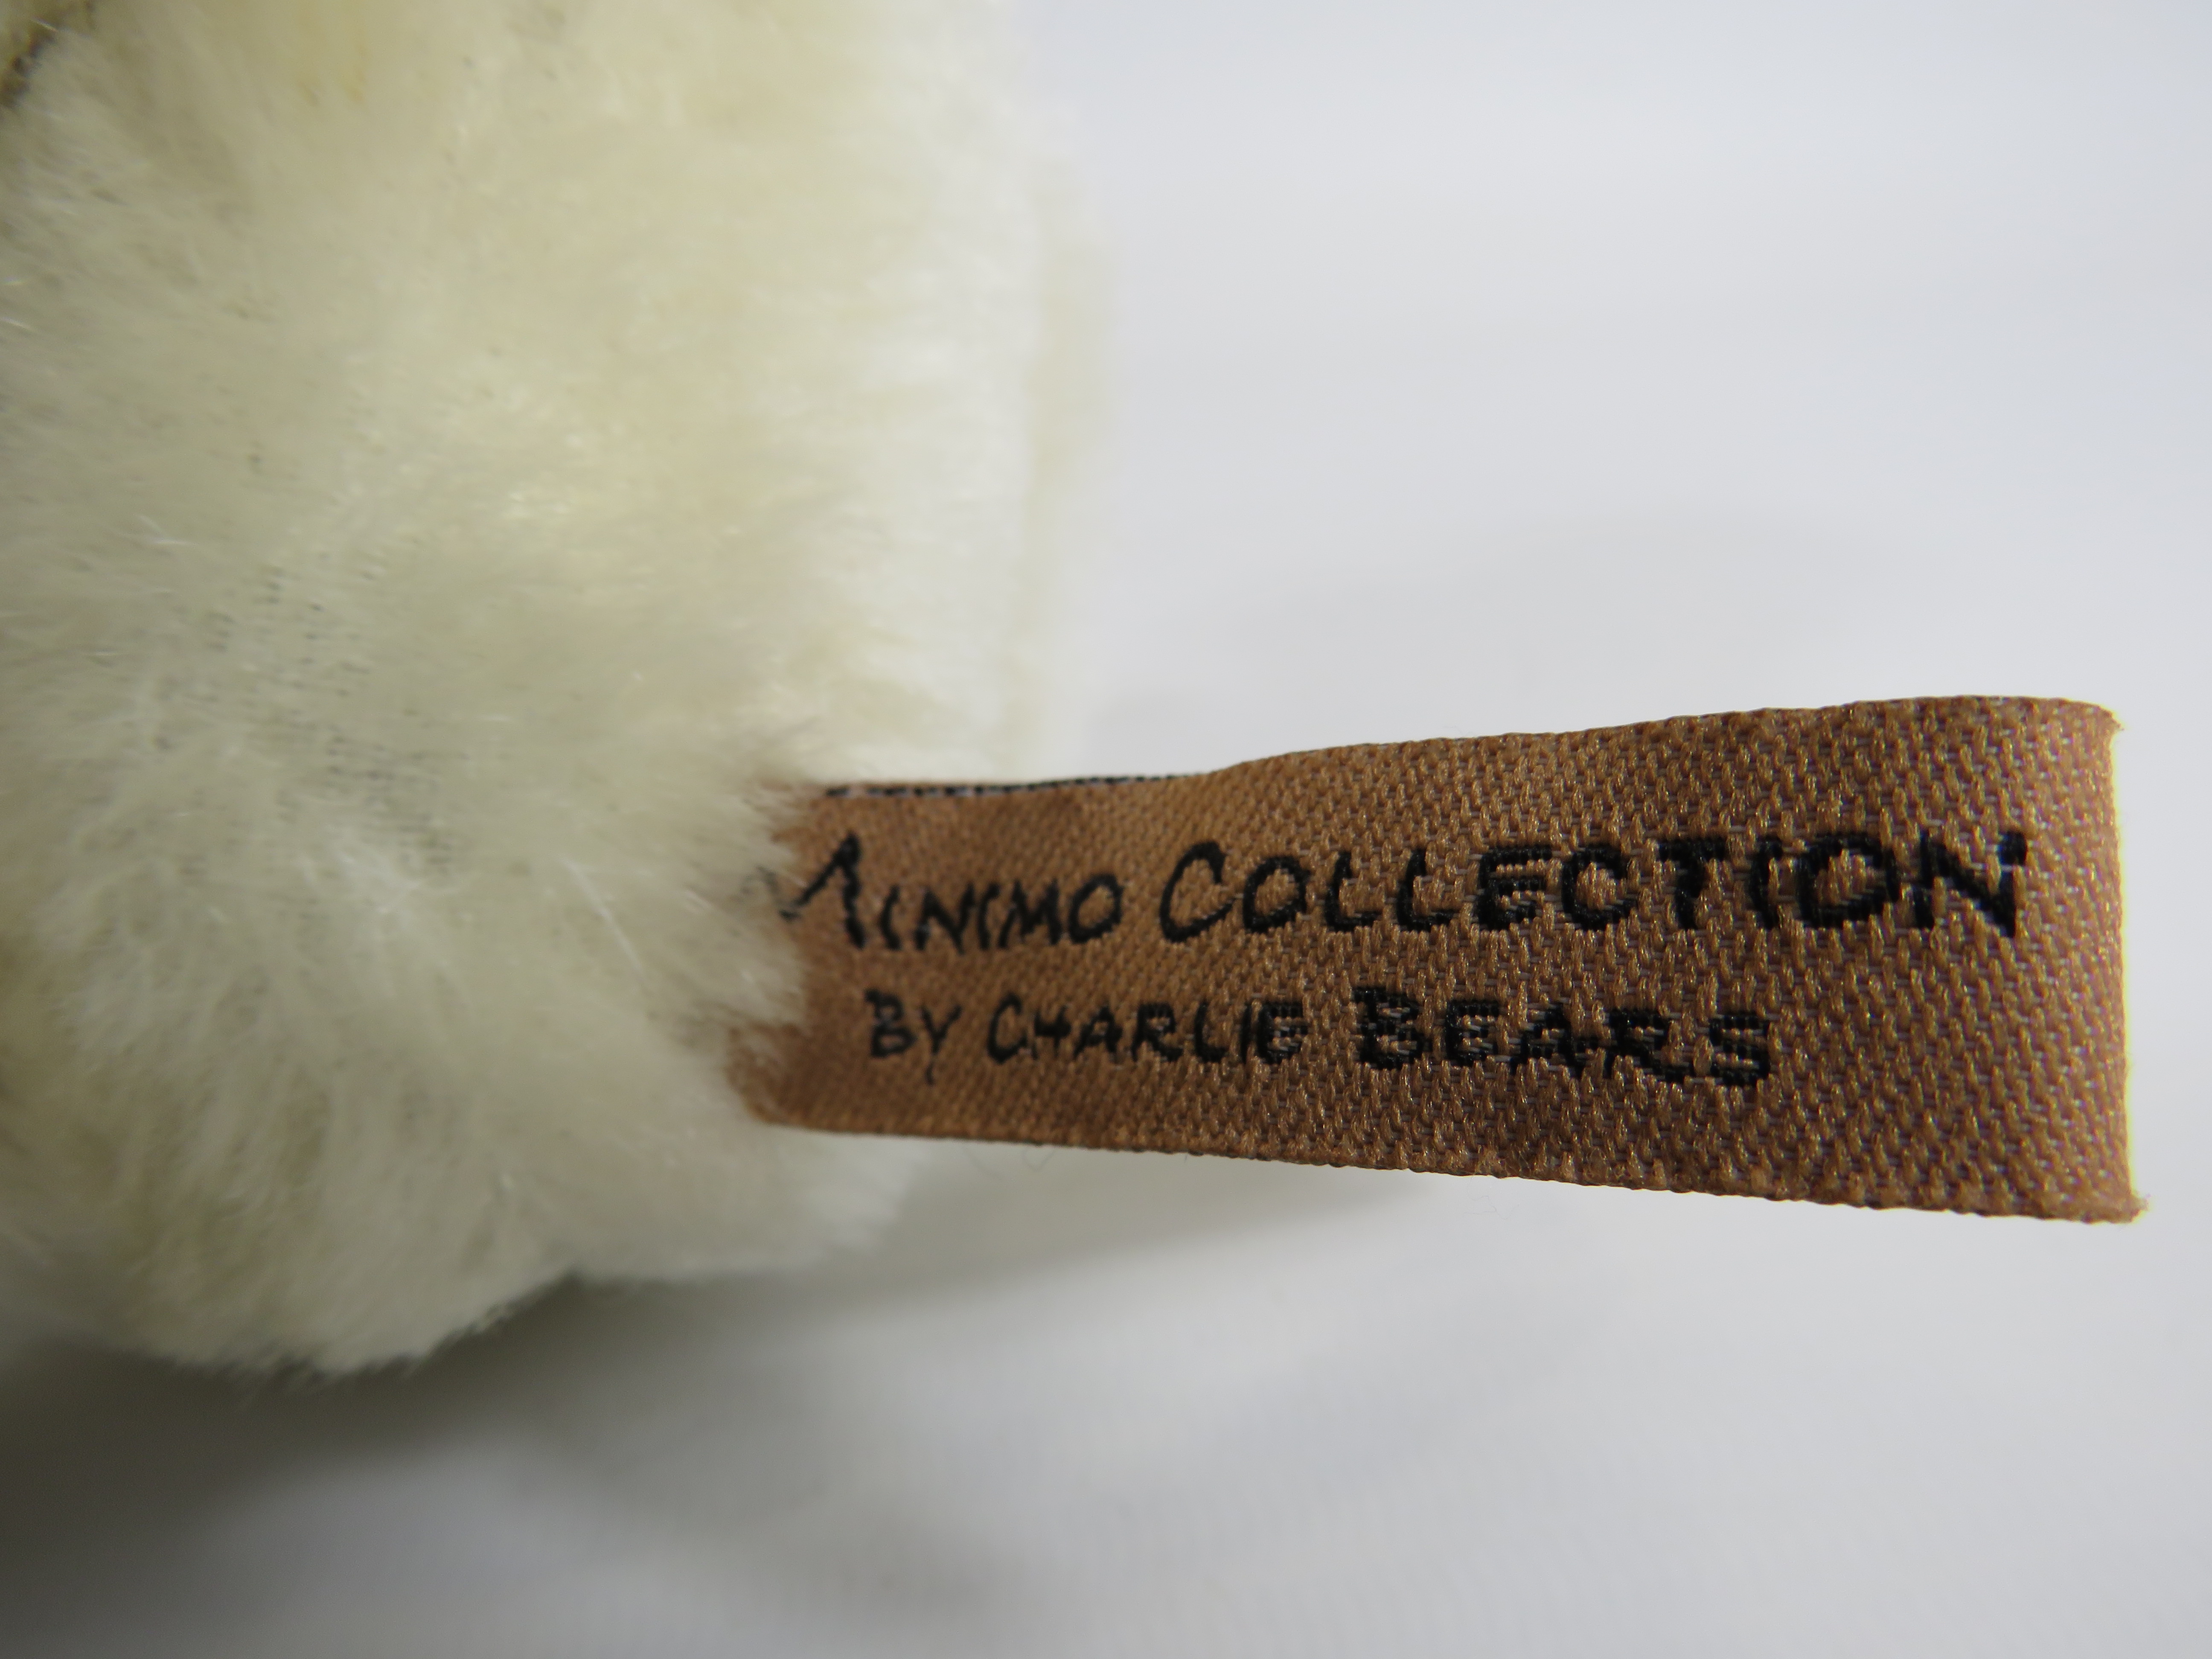 Charlie Bear Limited edition Minimo collection "Icicle" No 77 of 2000. - Image 4 of 5